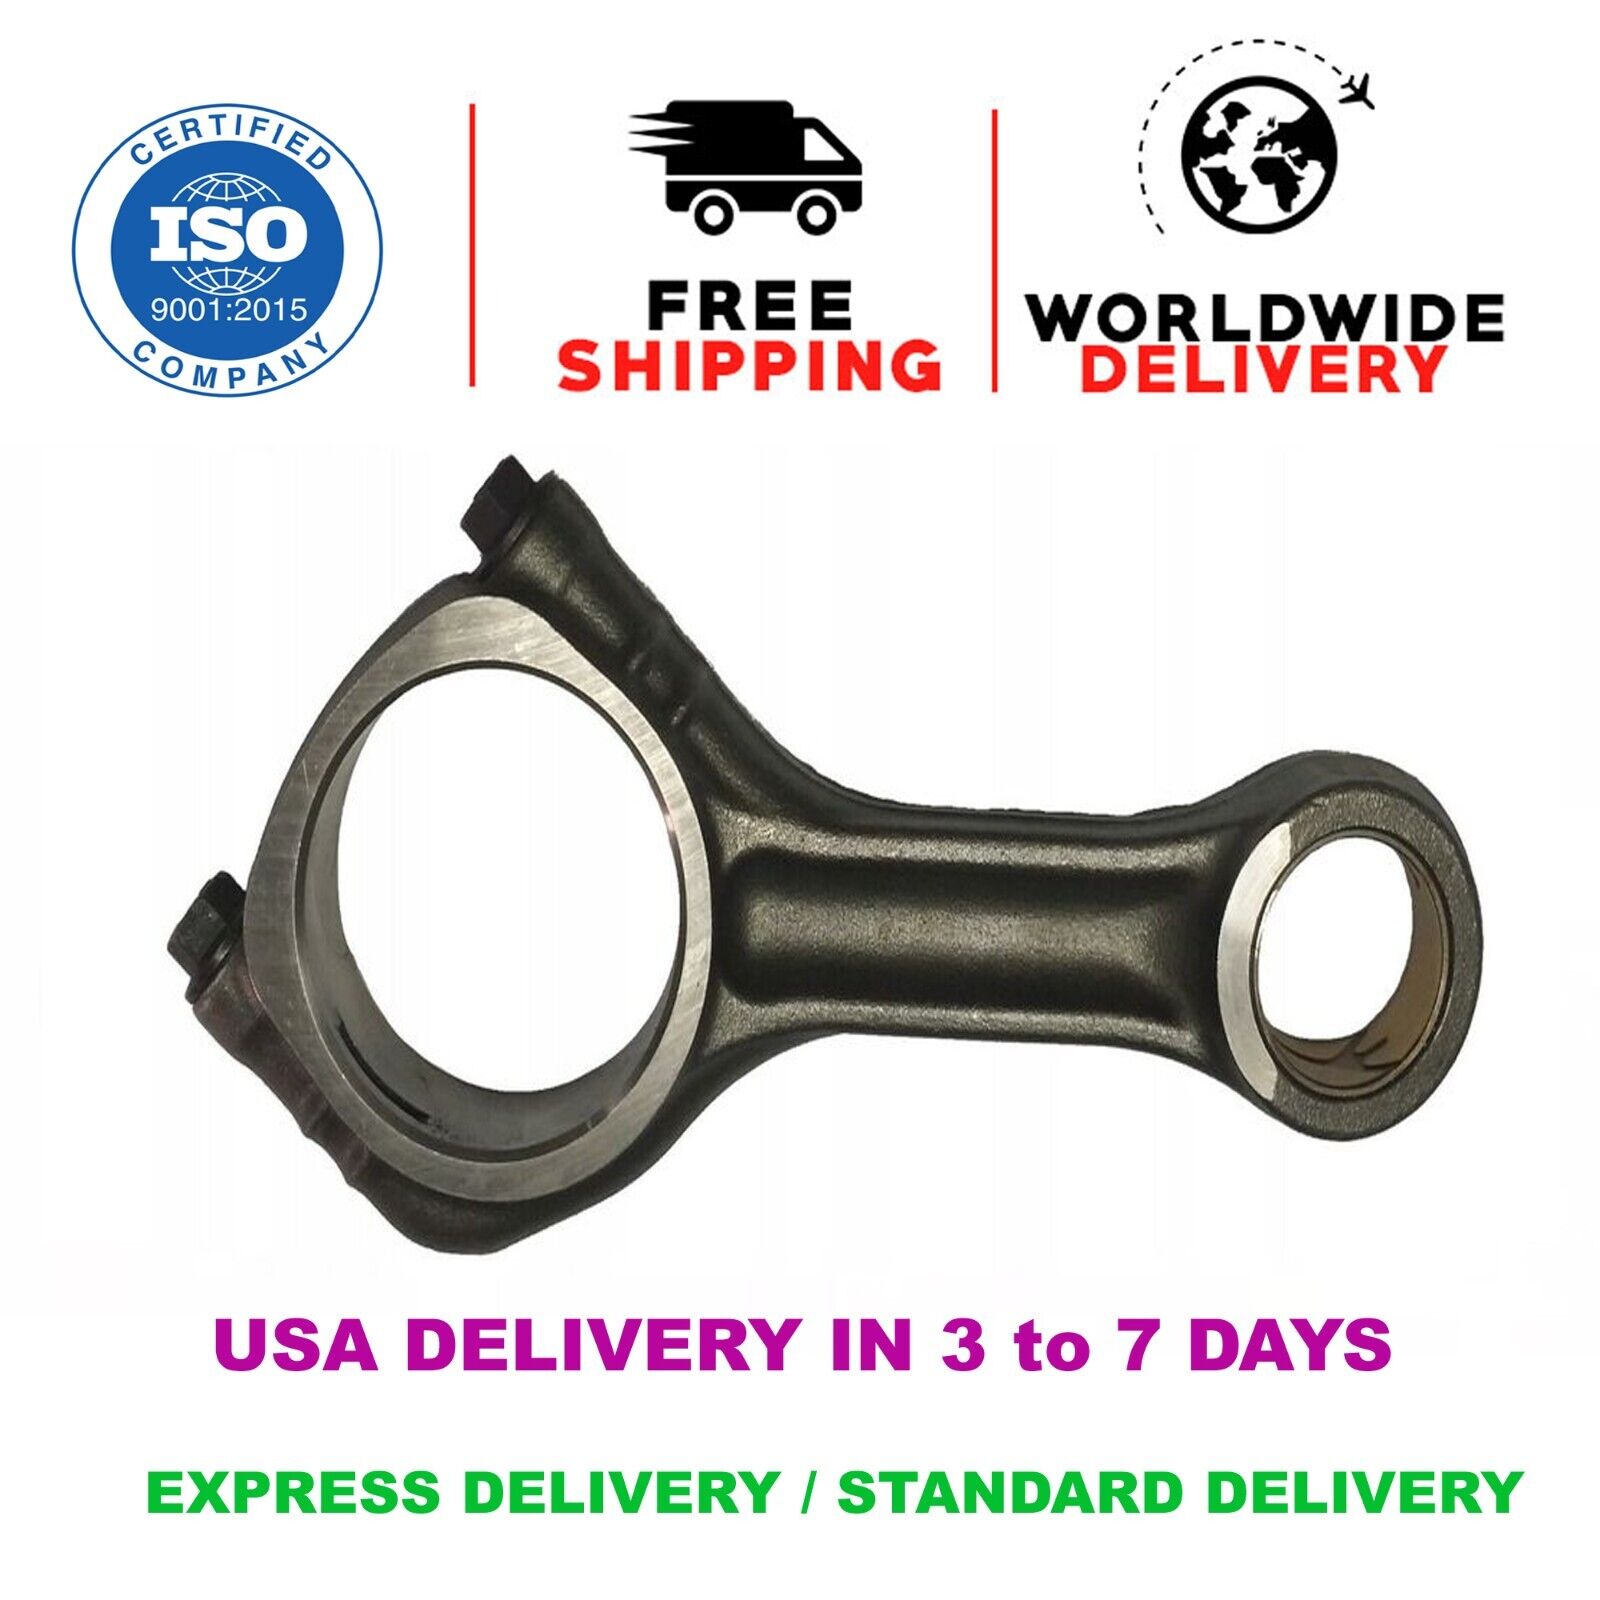 New Connecting Con Rod FITS for Fiat Iveco New Holland L185 L180 420 430 Case IH